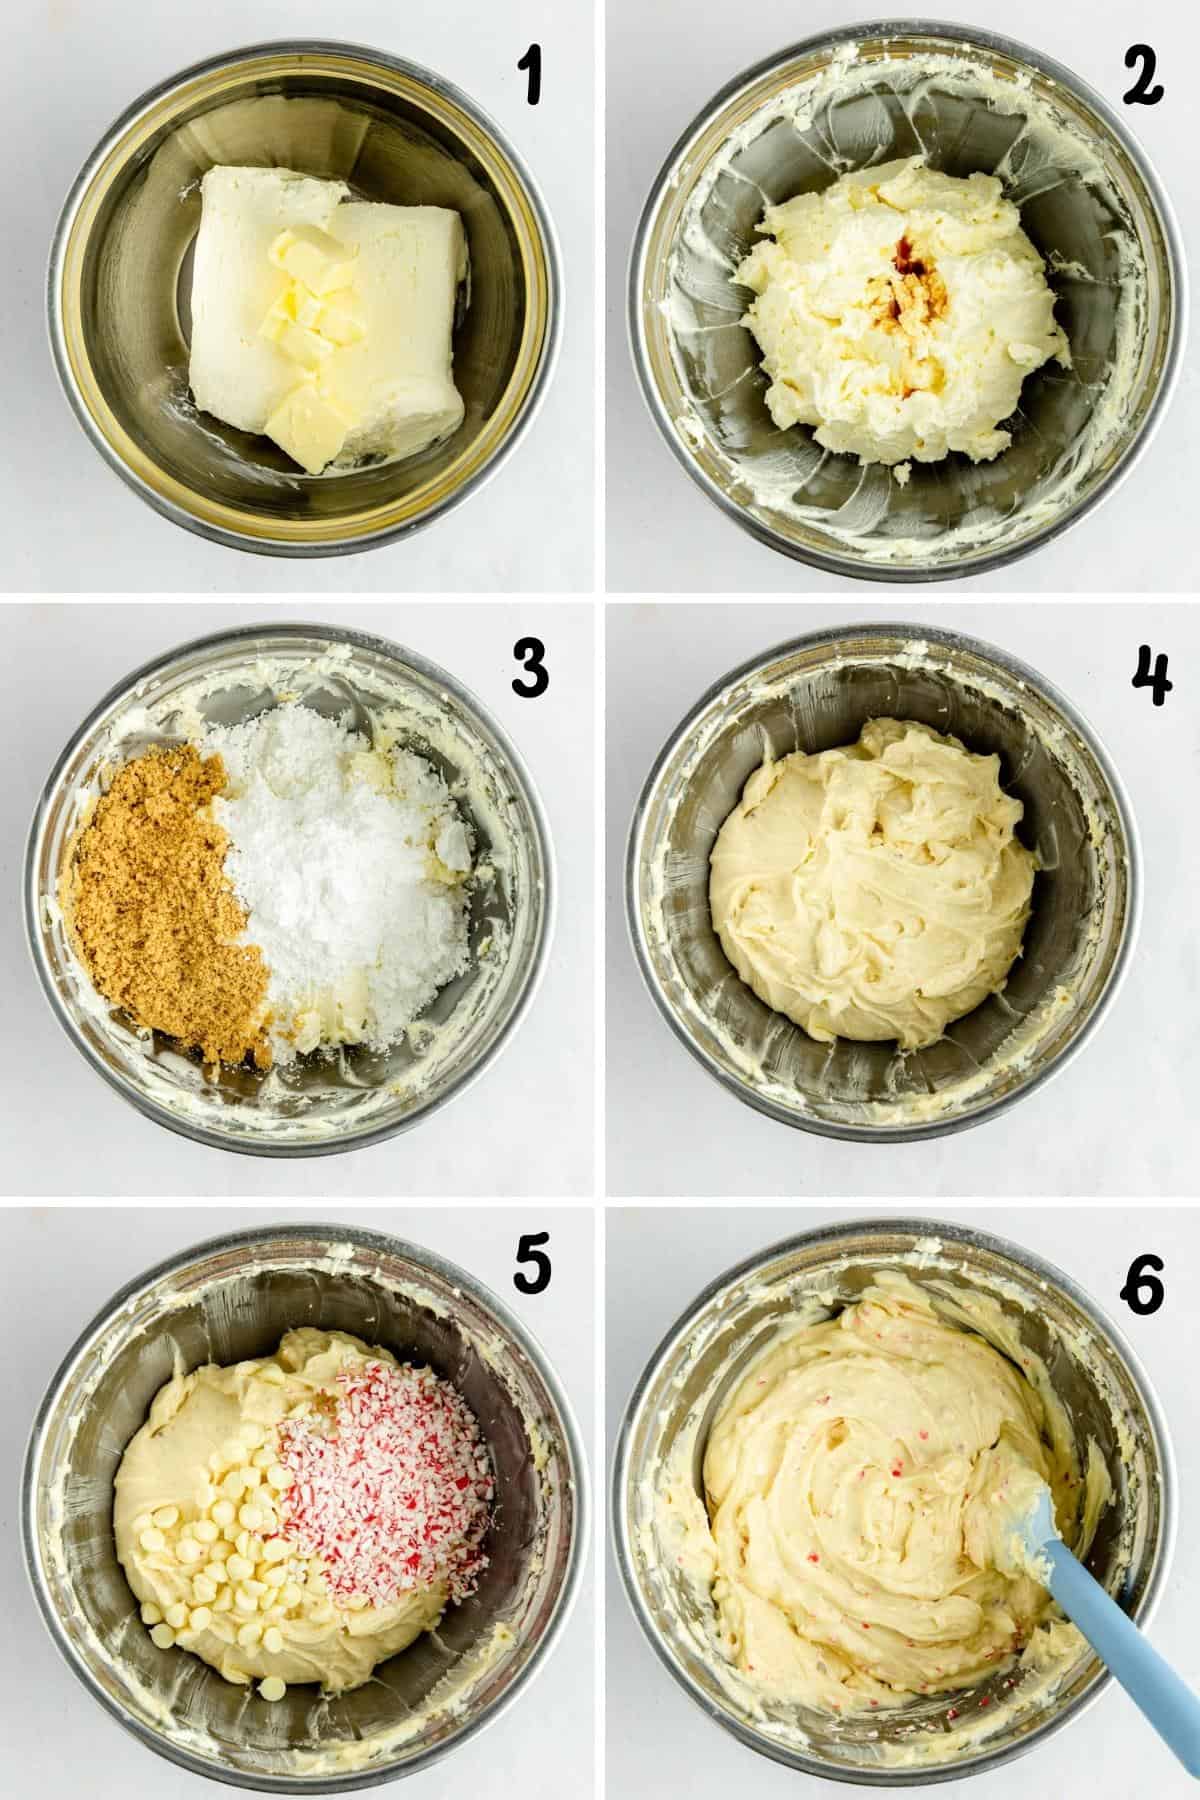 Collage image showing steps to make cheesecake ball filling.